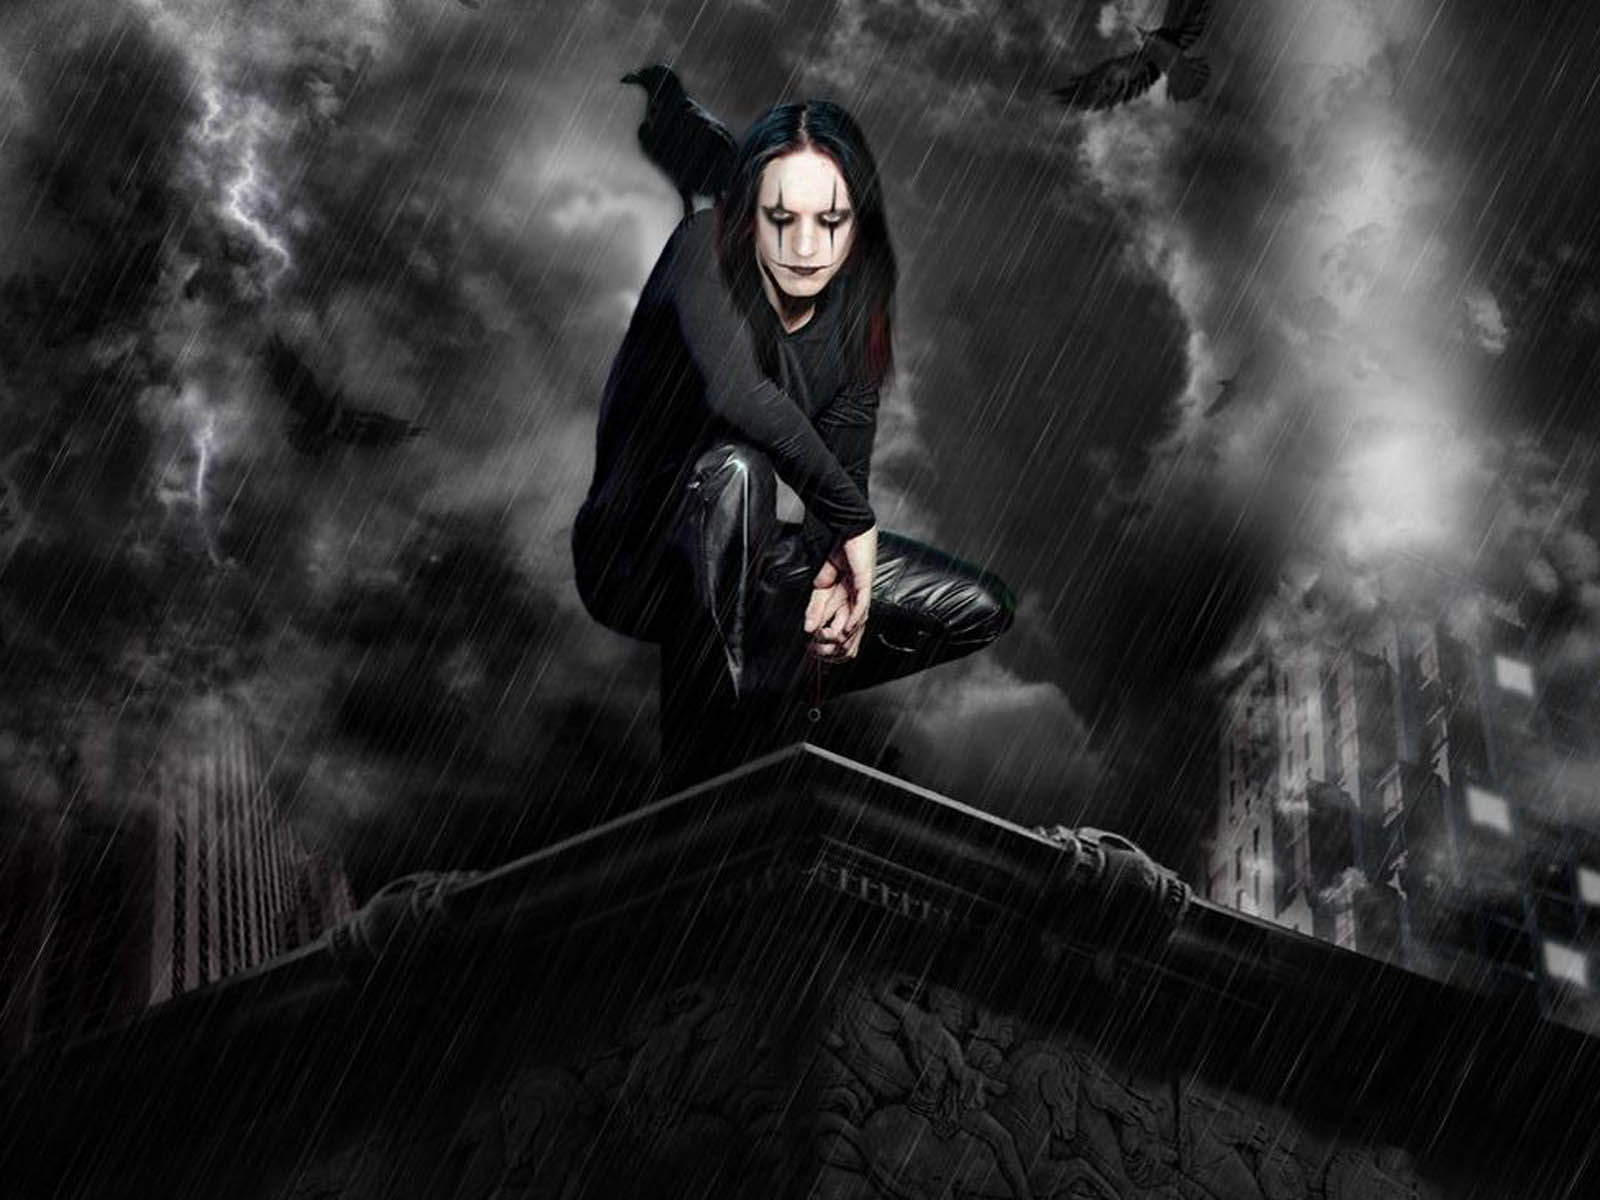 Tag Dark Gothic Wallpapers BackgroundsPhotos Pictures and Images